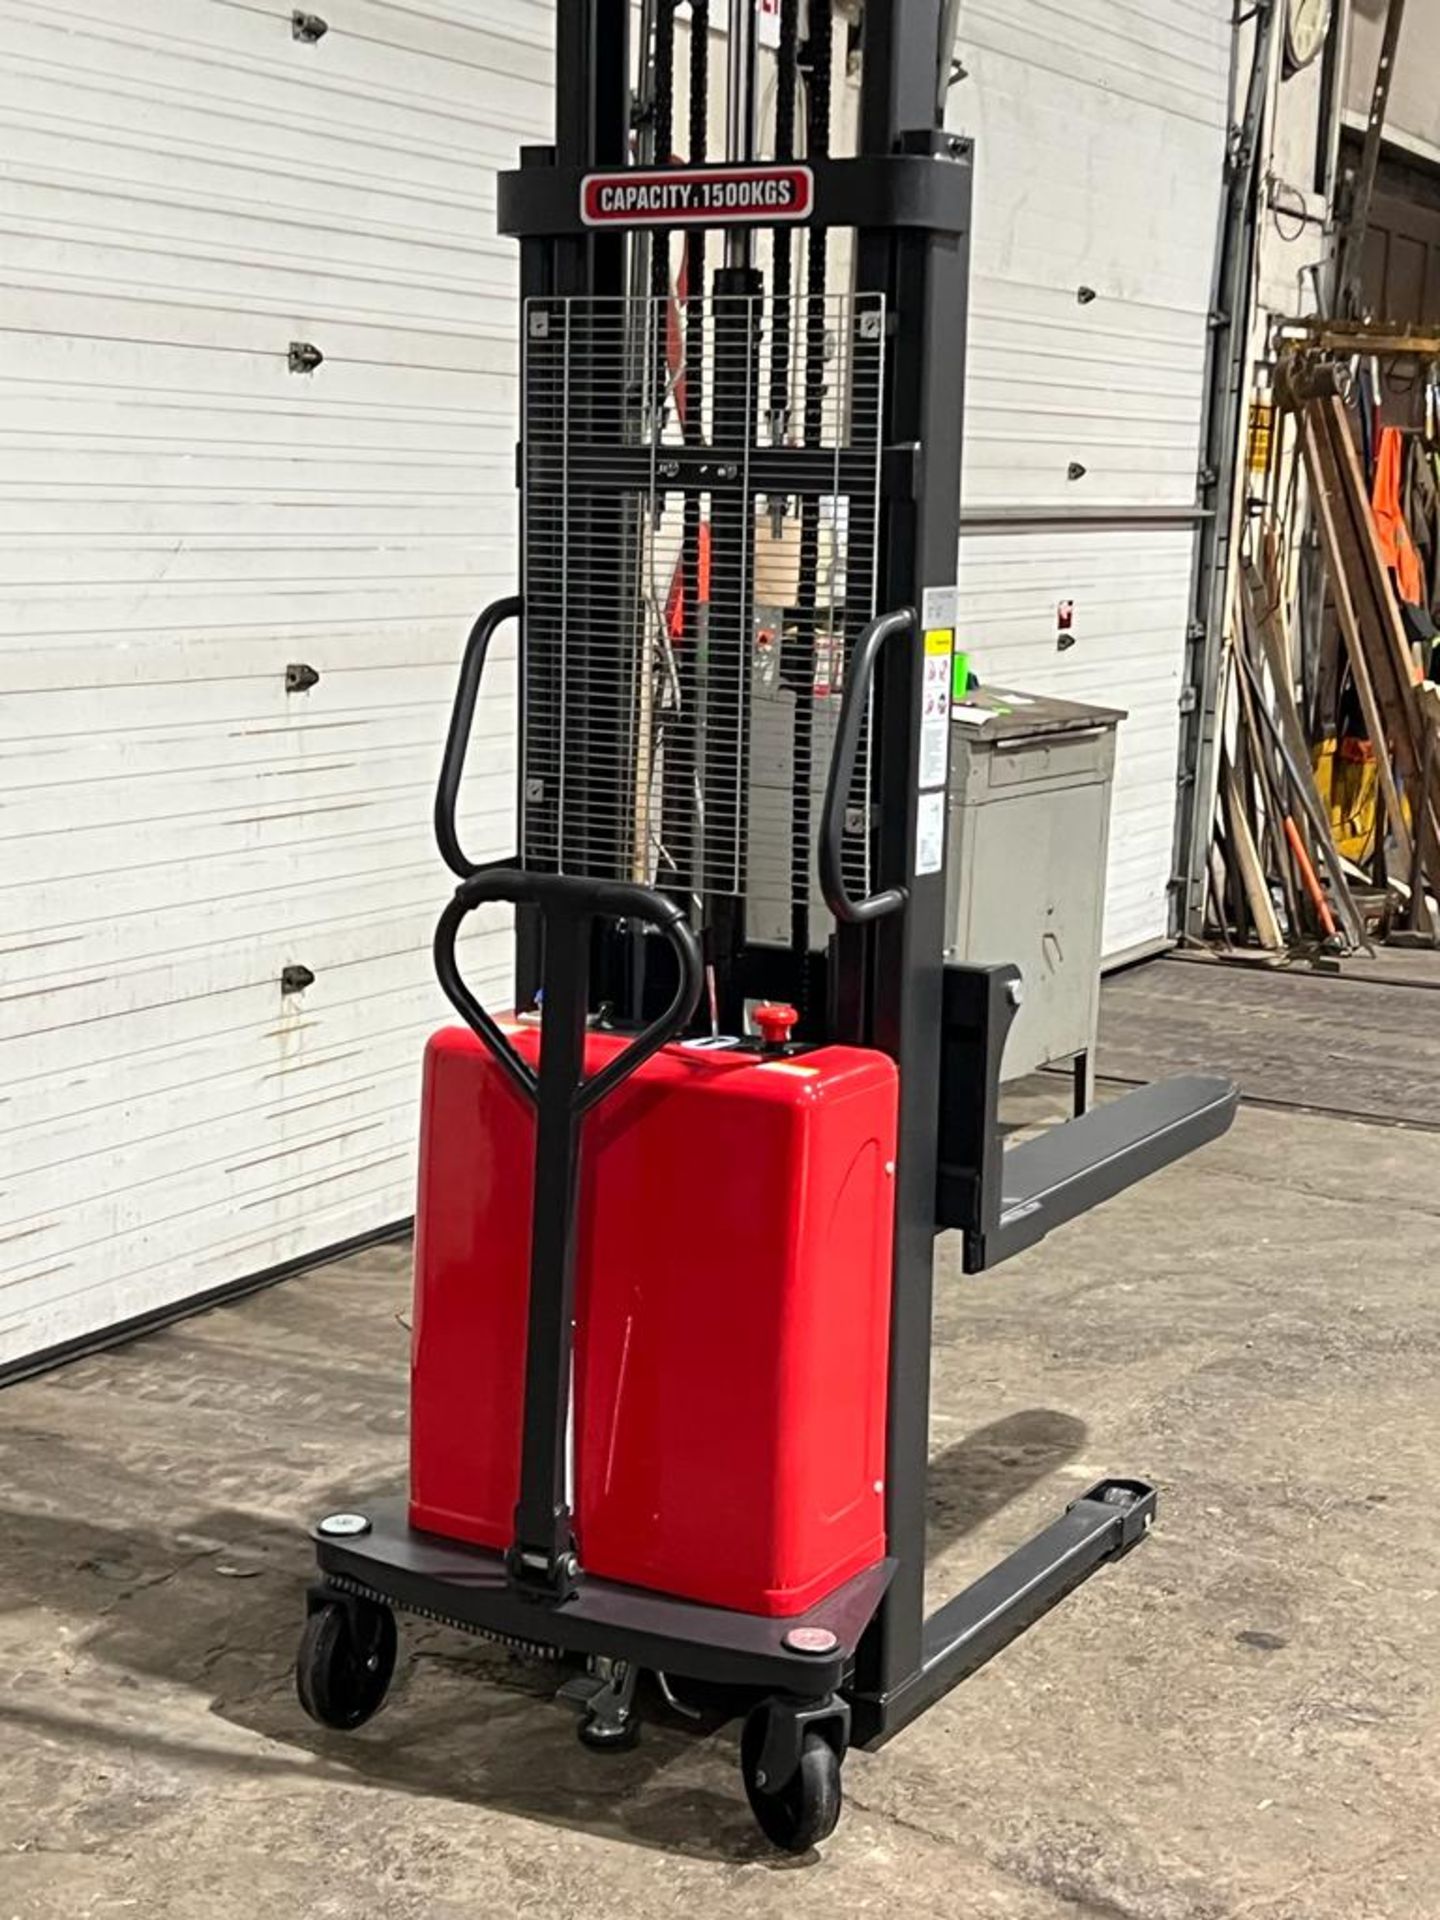 NEW Extreme 3,300lbs / 1,500kg capacity Semi-Automatic Pallet Stacker Walk Behind NEW 12V - Image 2 of 5